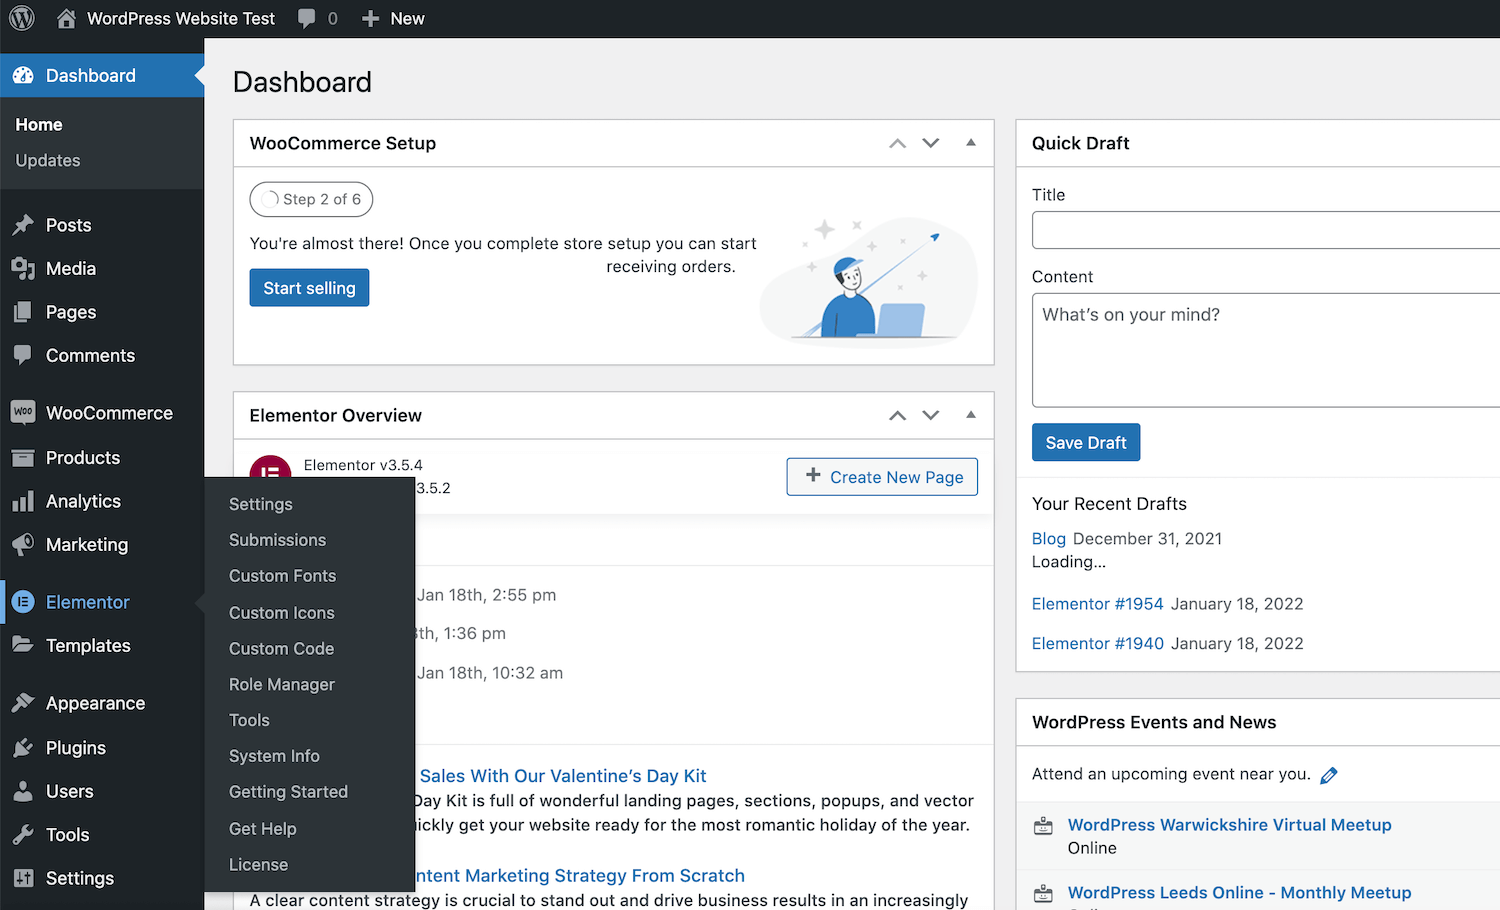 Elementor option is added to WordPress dashboard once it is activated